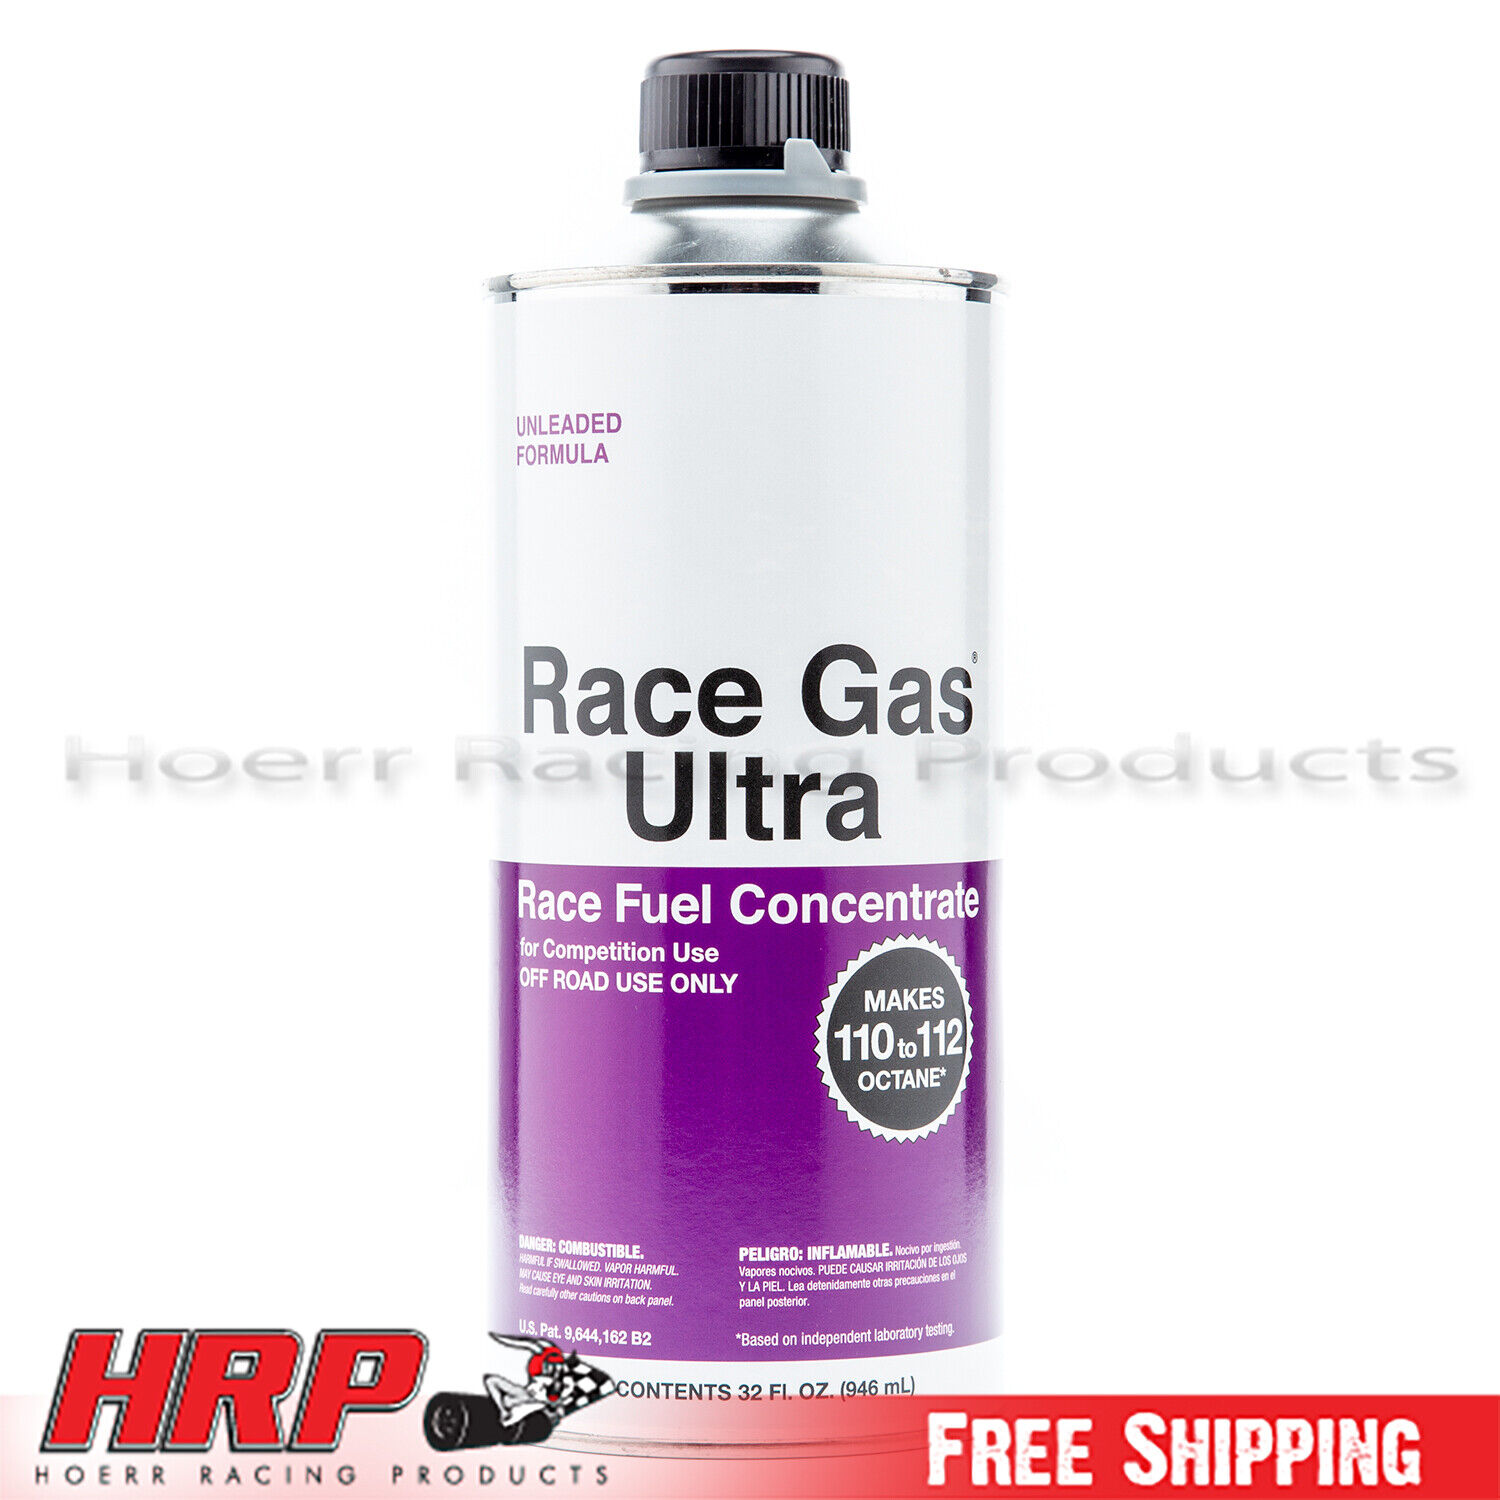 RACE-GAS ULTRA Race Fuel Concentrate 32oz Can